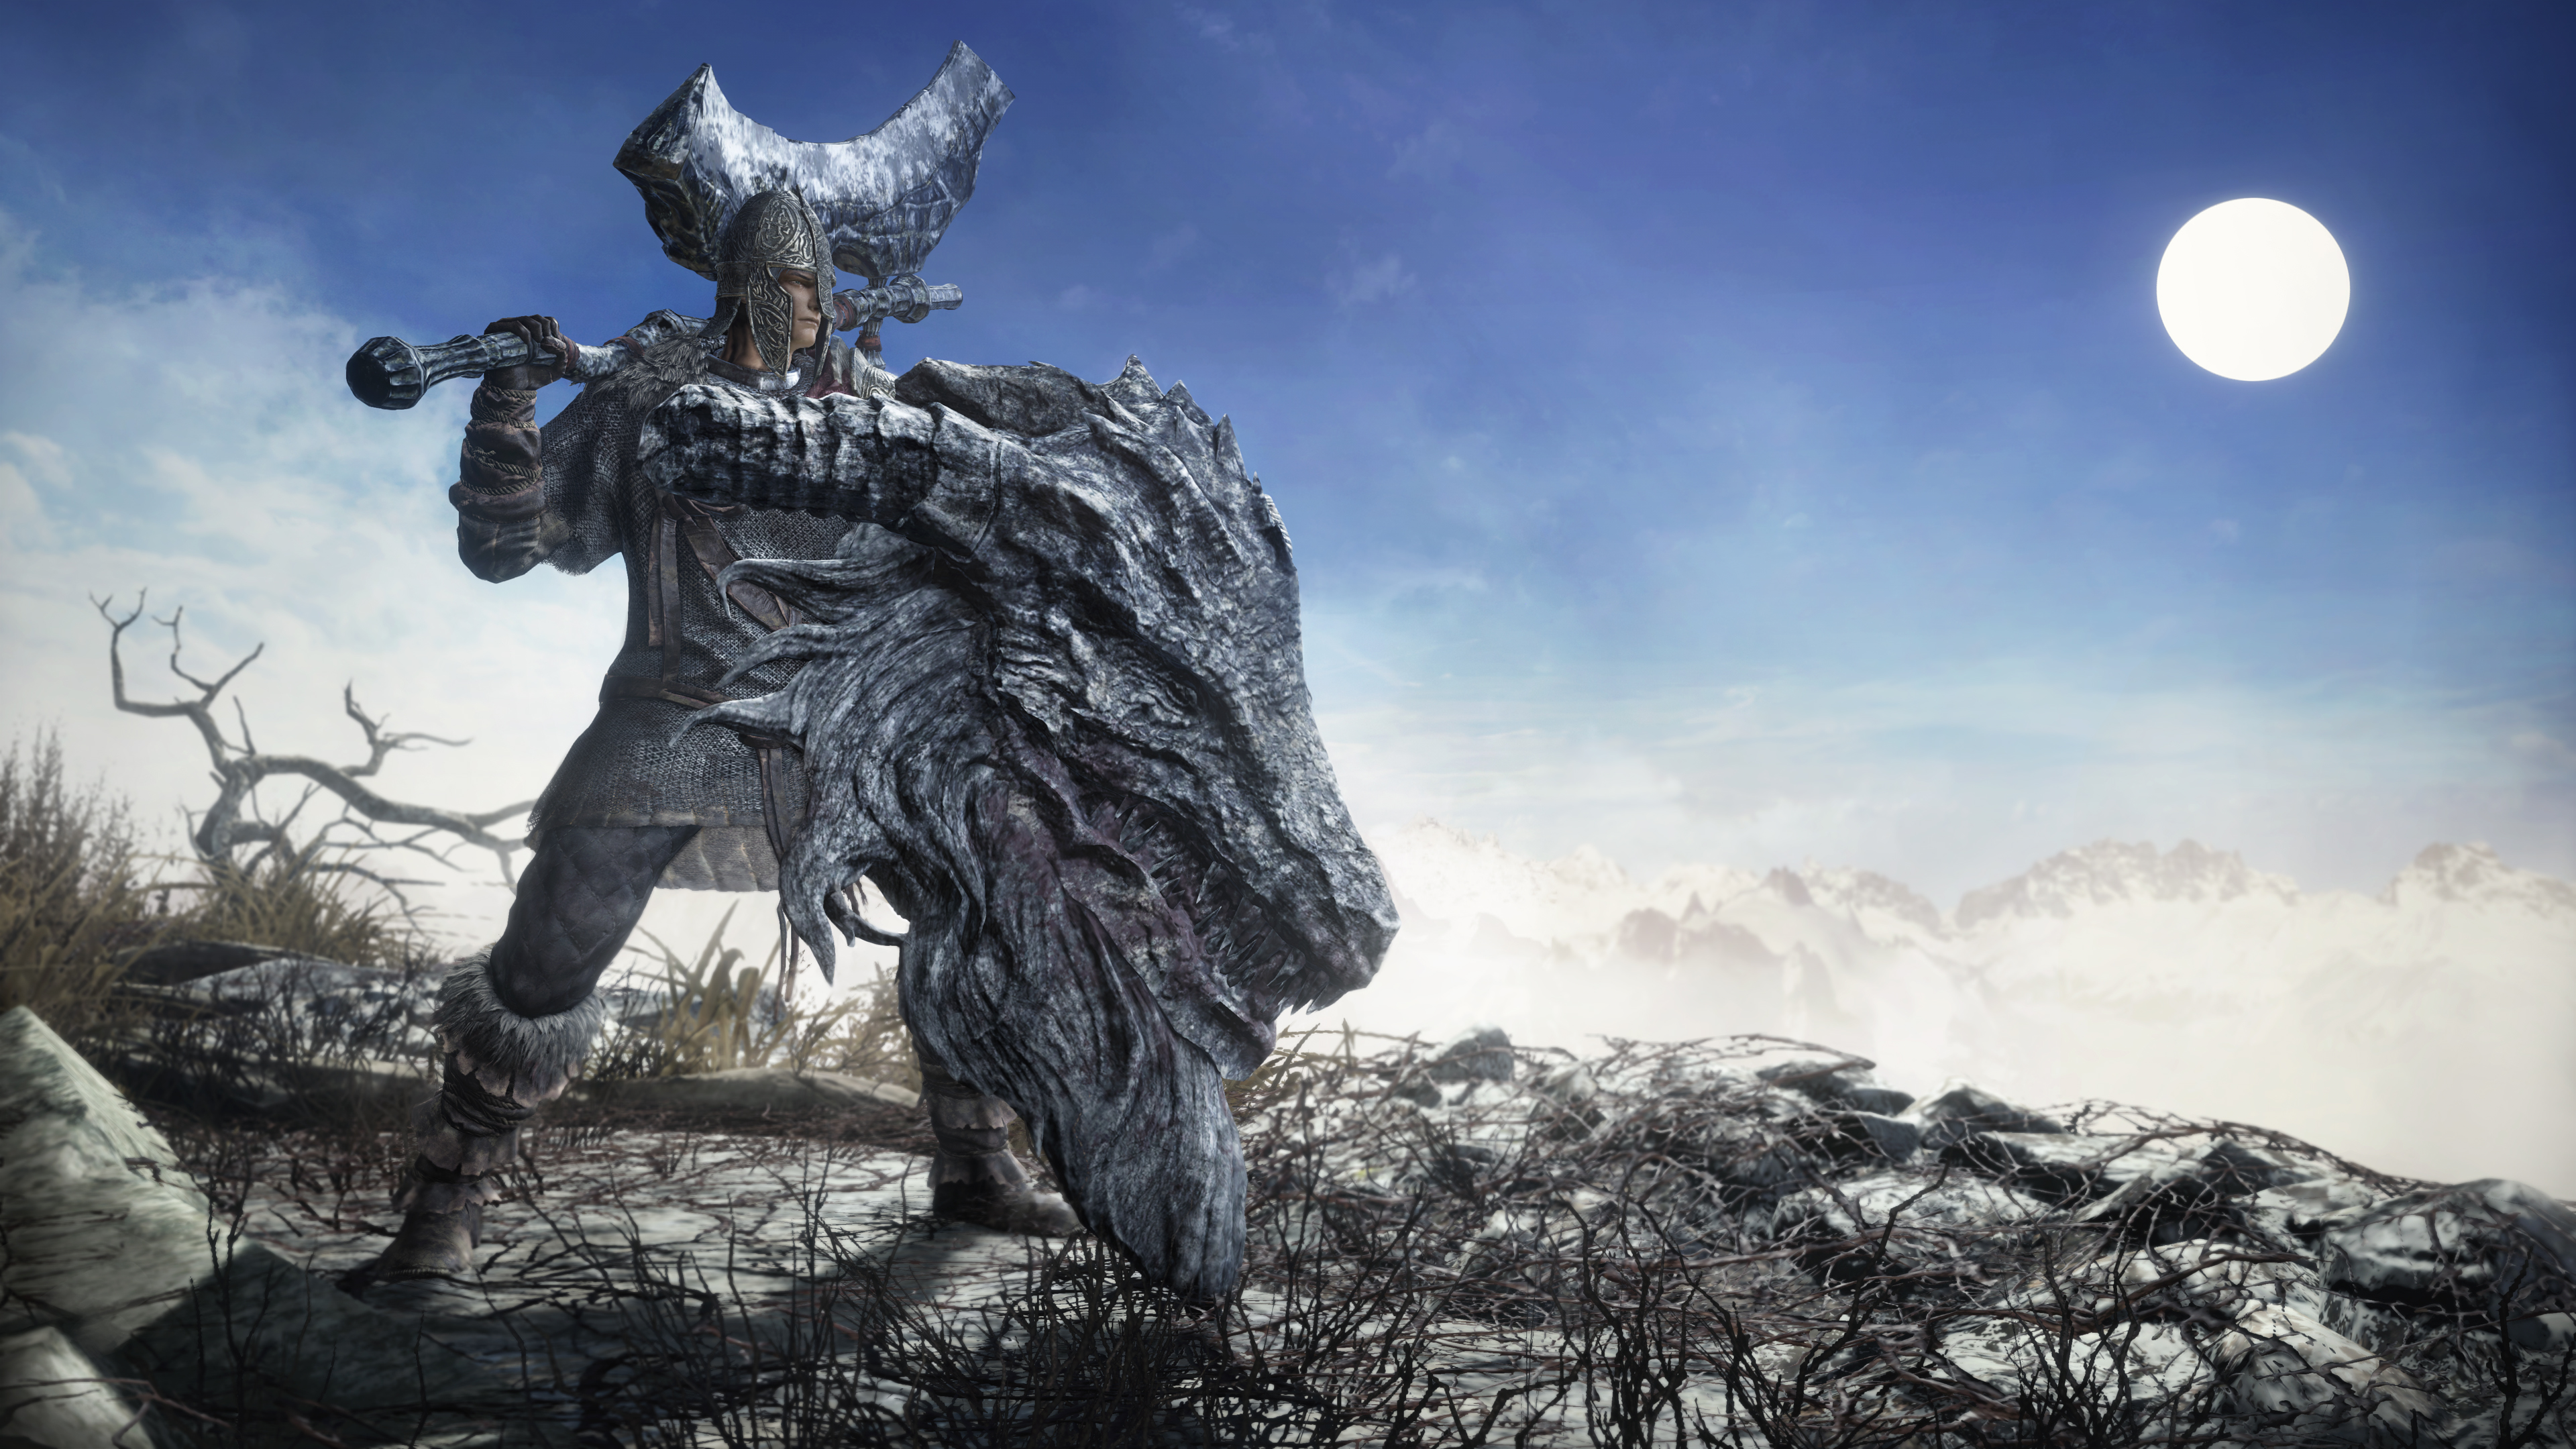 New Dark Souls III “The Ringed City” DLC Details, Screenshots, and Gameplay Released